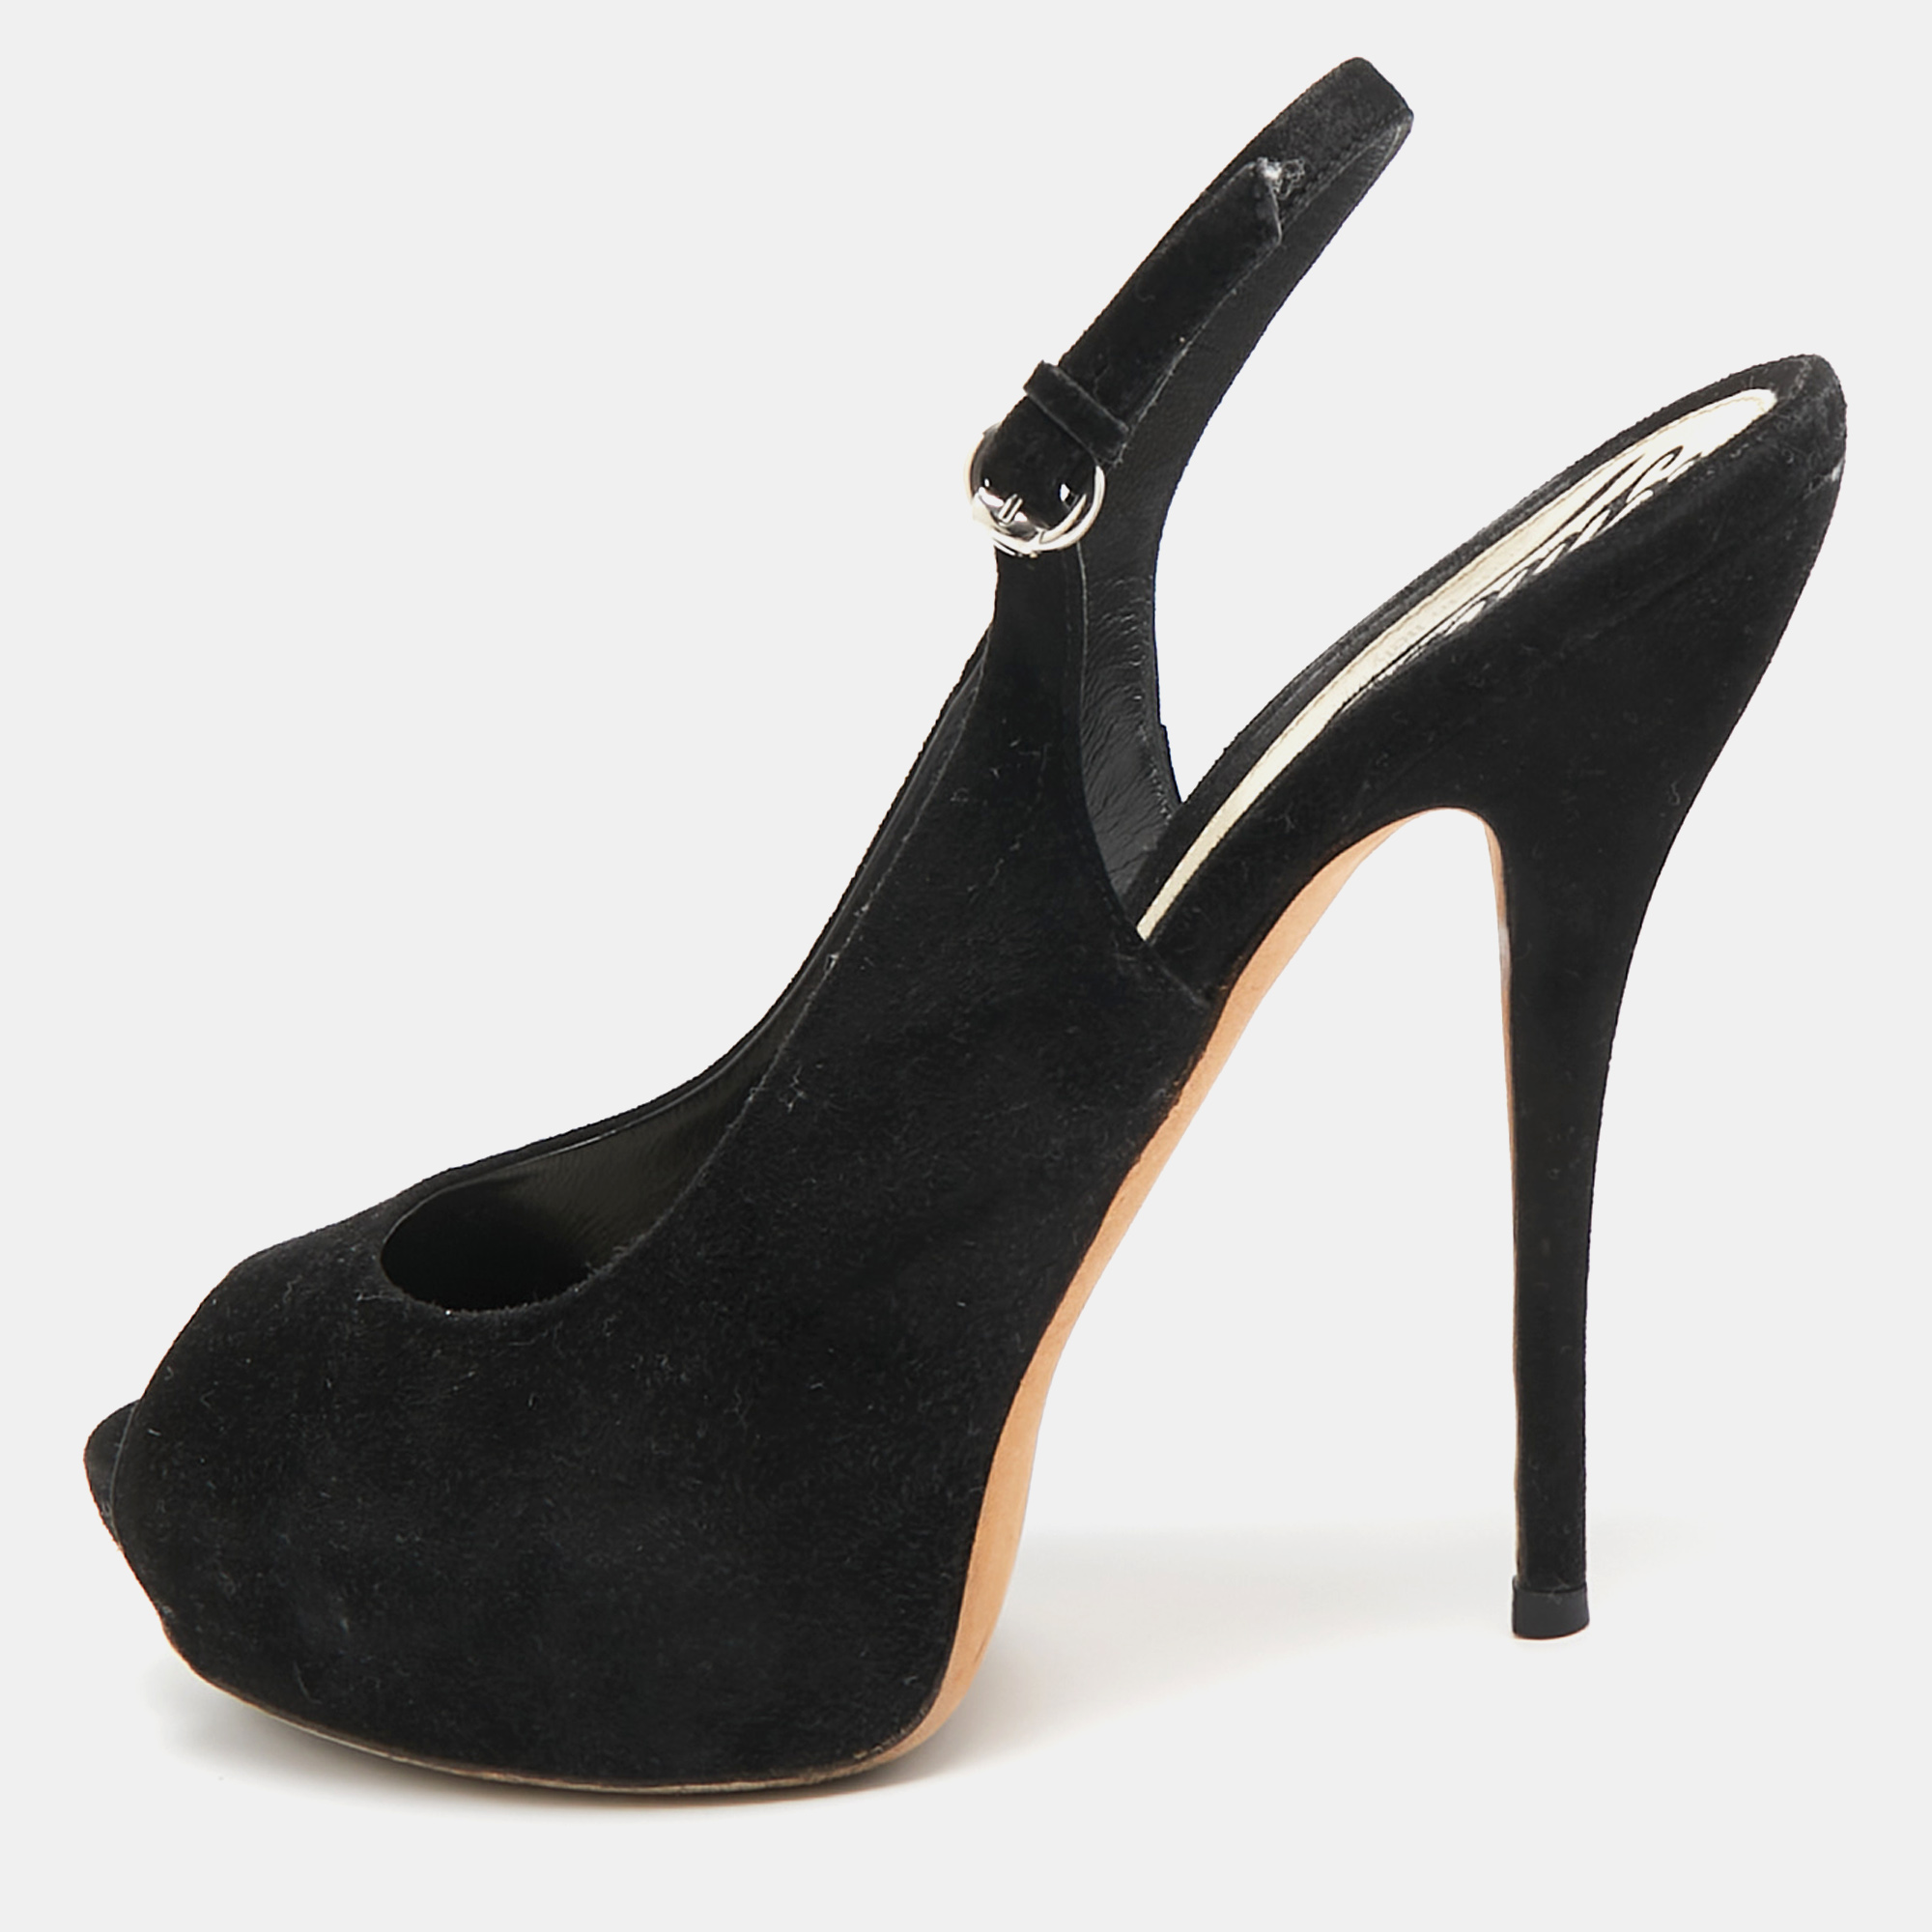 Pre-owned Gucci Black Suede Peep Toe Slingback Pumps Size 37.5